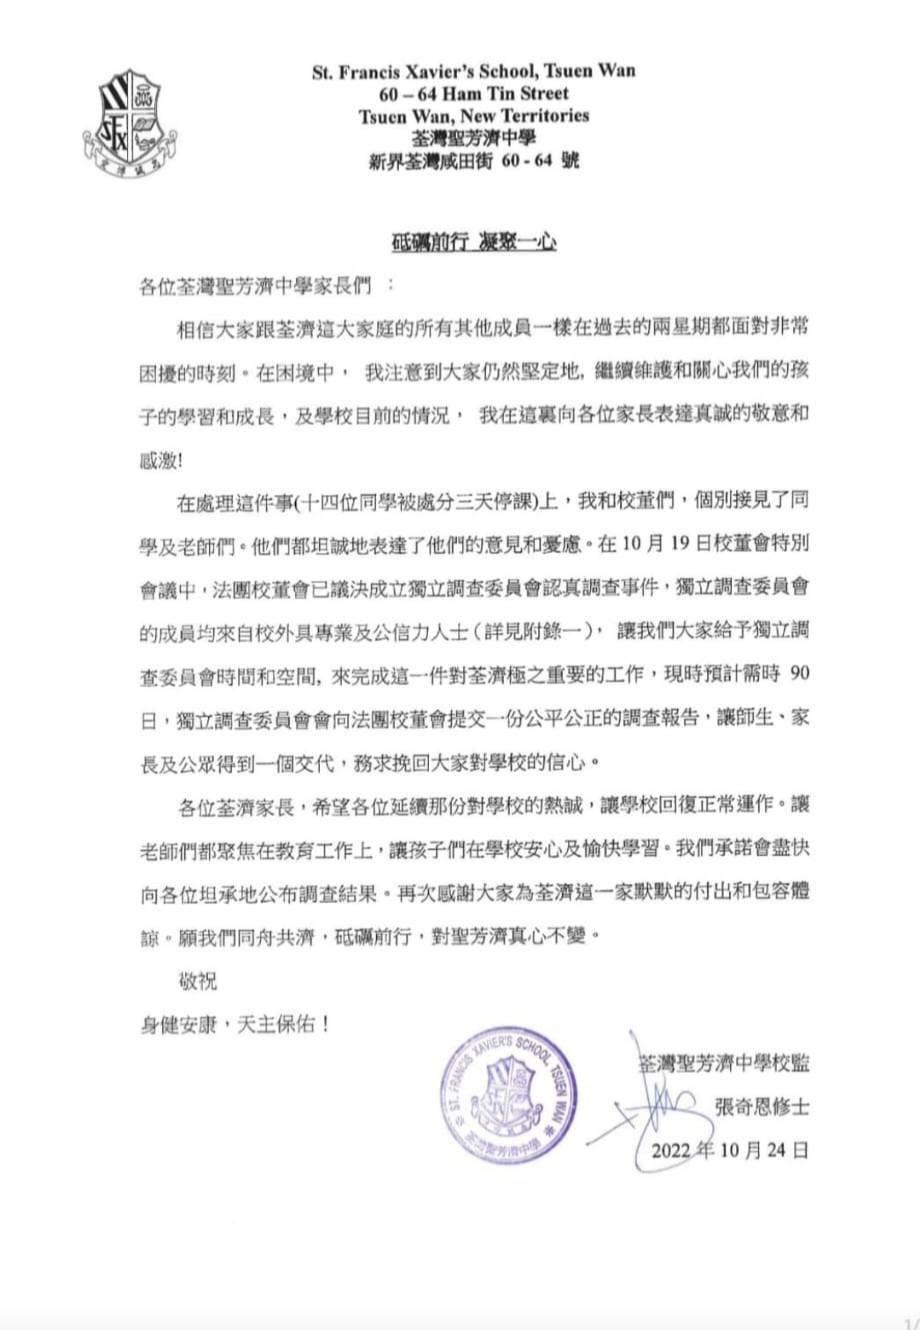 The school sent an open letter to the parents of the students on Oct. 24, stating that the school decided to set up an independent investigation committee to investigate the earlier incident of 14 students who were punished and suspended for three days. However, the letter was removed within an hour. (Courtesy of the interviewee)